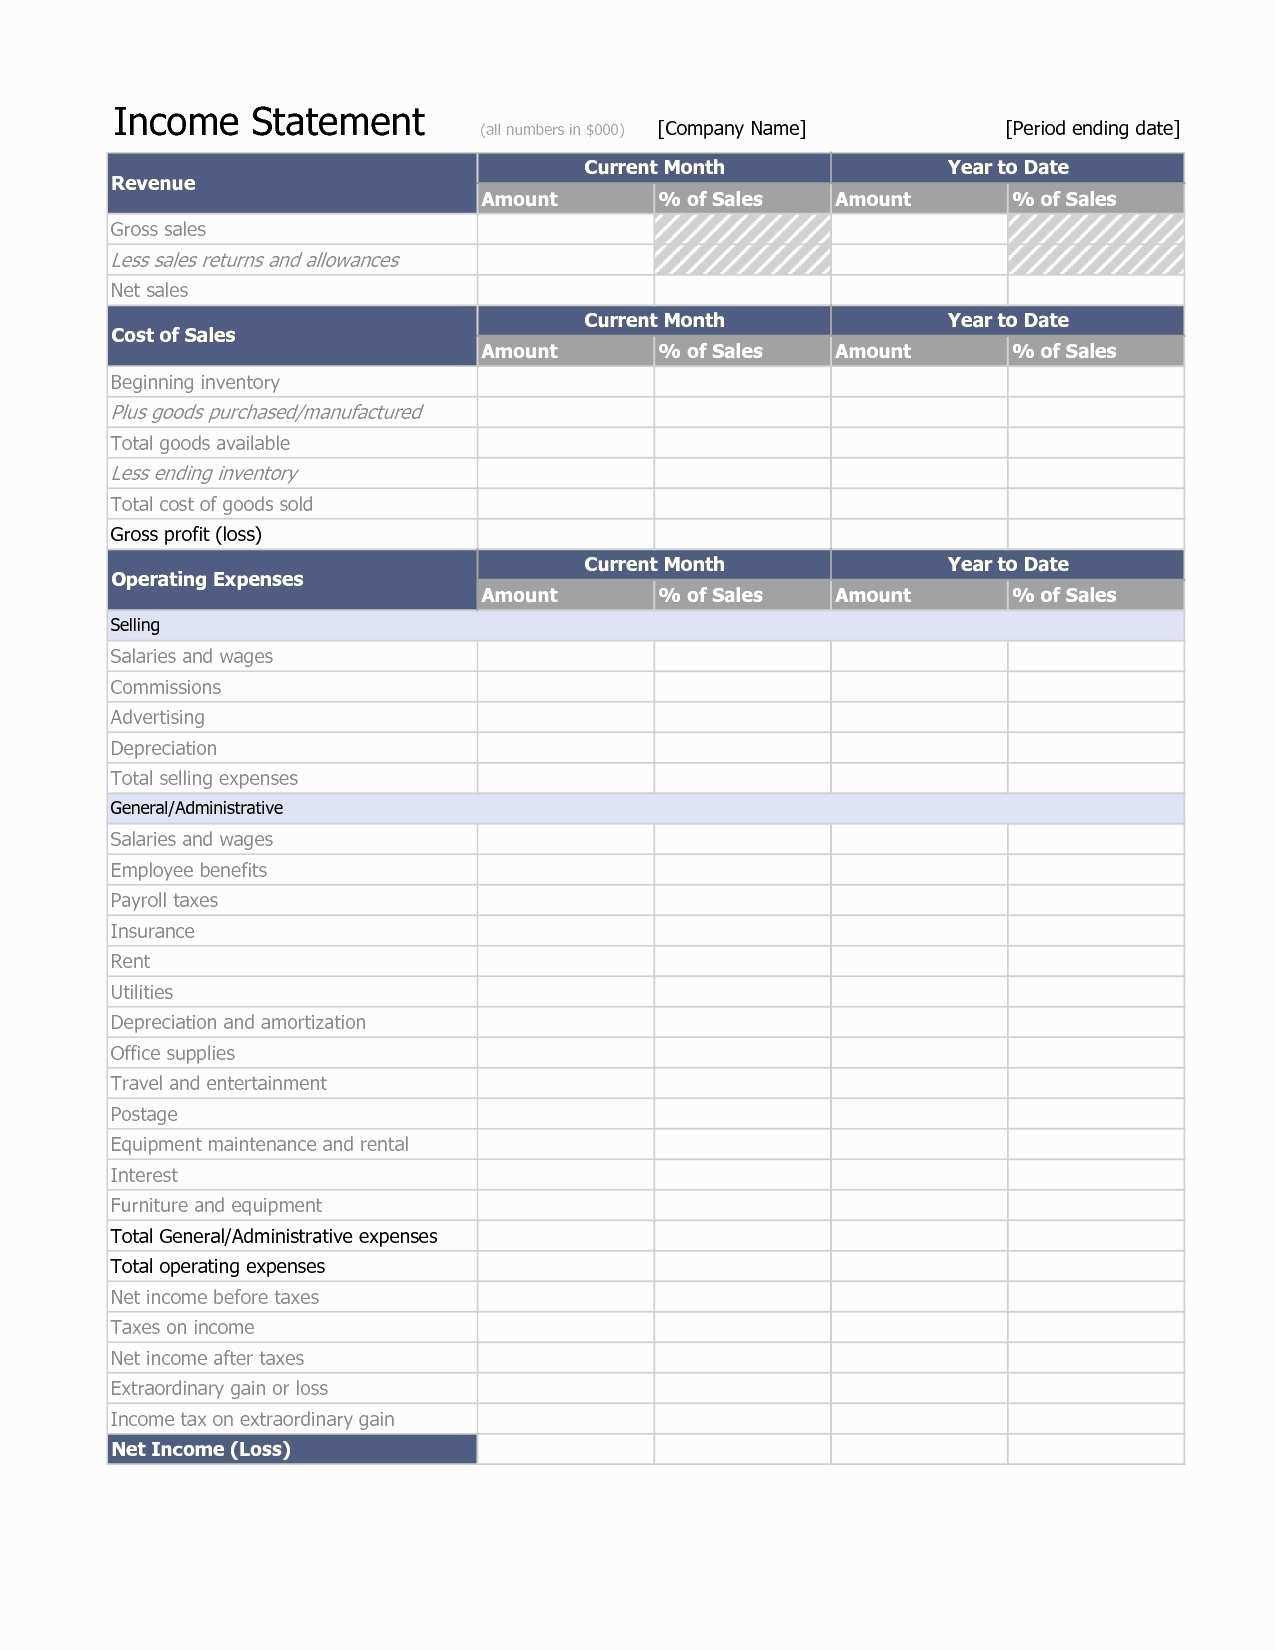 Sales Tax Worksheet or Property Inventory form Inspirational Rental Property Calculator